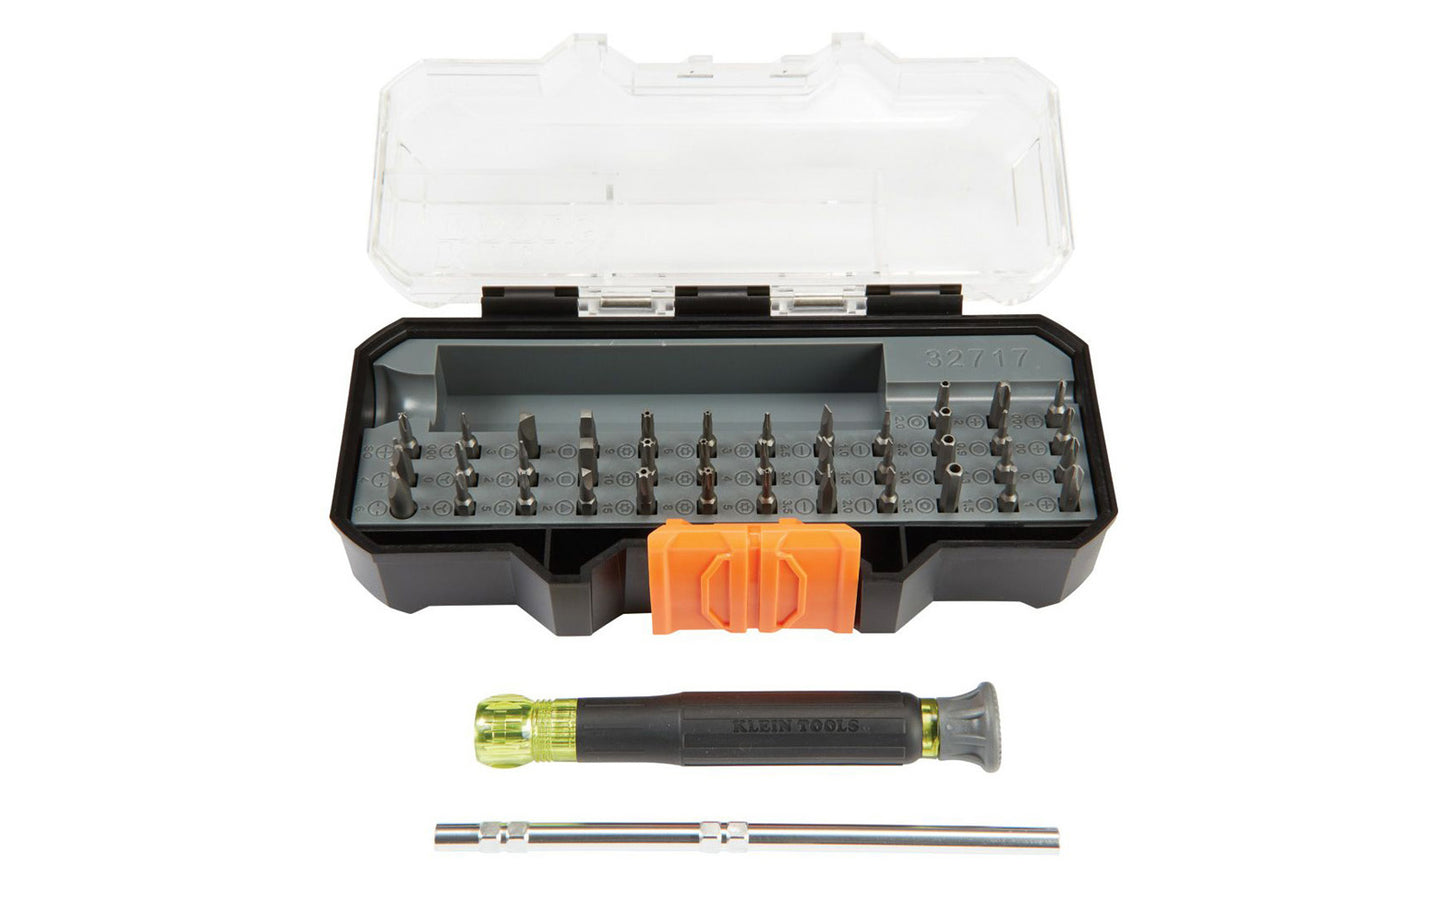 Klein All-in-1 Precision Screwdriver Set - 32717. 40 piece set. Kit includes one screwdriver & 39 bits for various applications including repair of most Apple® products. Compact carrying case features a stay-shut latch & extra-long bits for easier access. Klein Tools model 32717